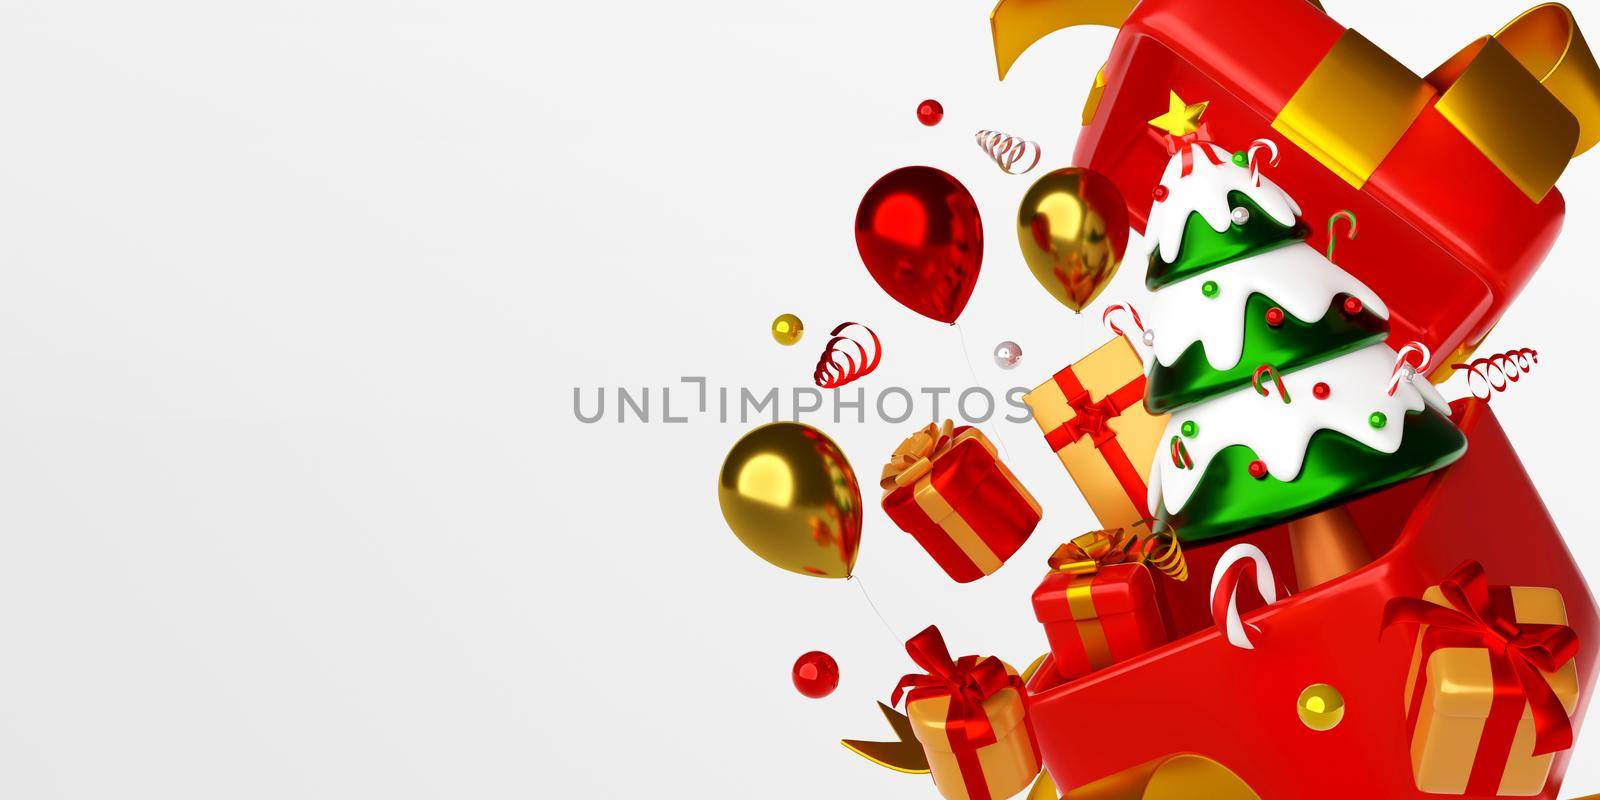 Christmas banner of Christmas tree and decorations pop up from gift box, 3d illustration by nutzchotwarut